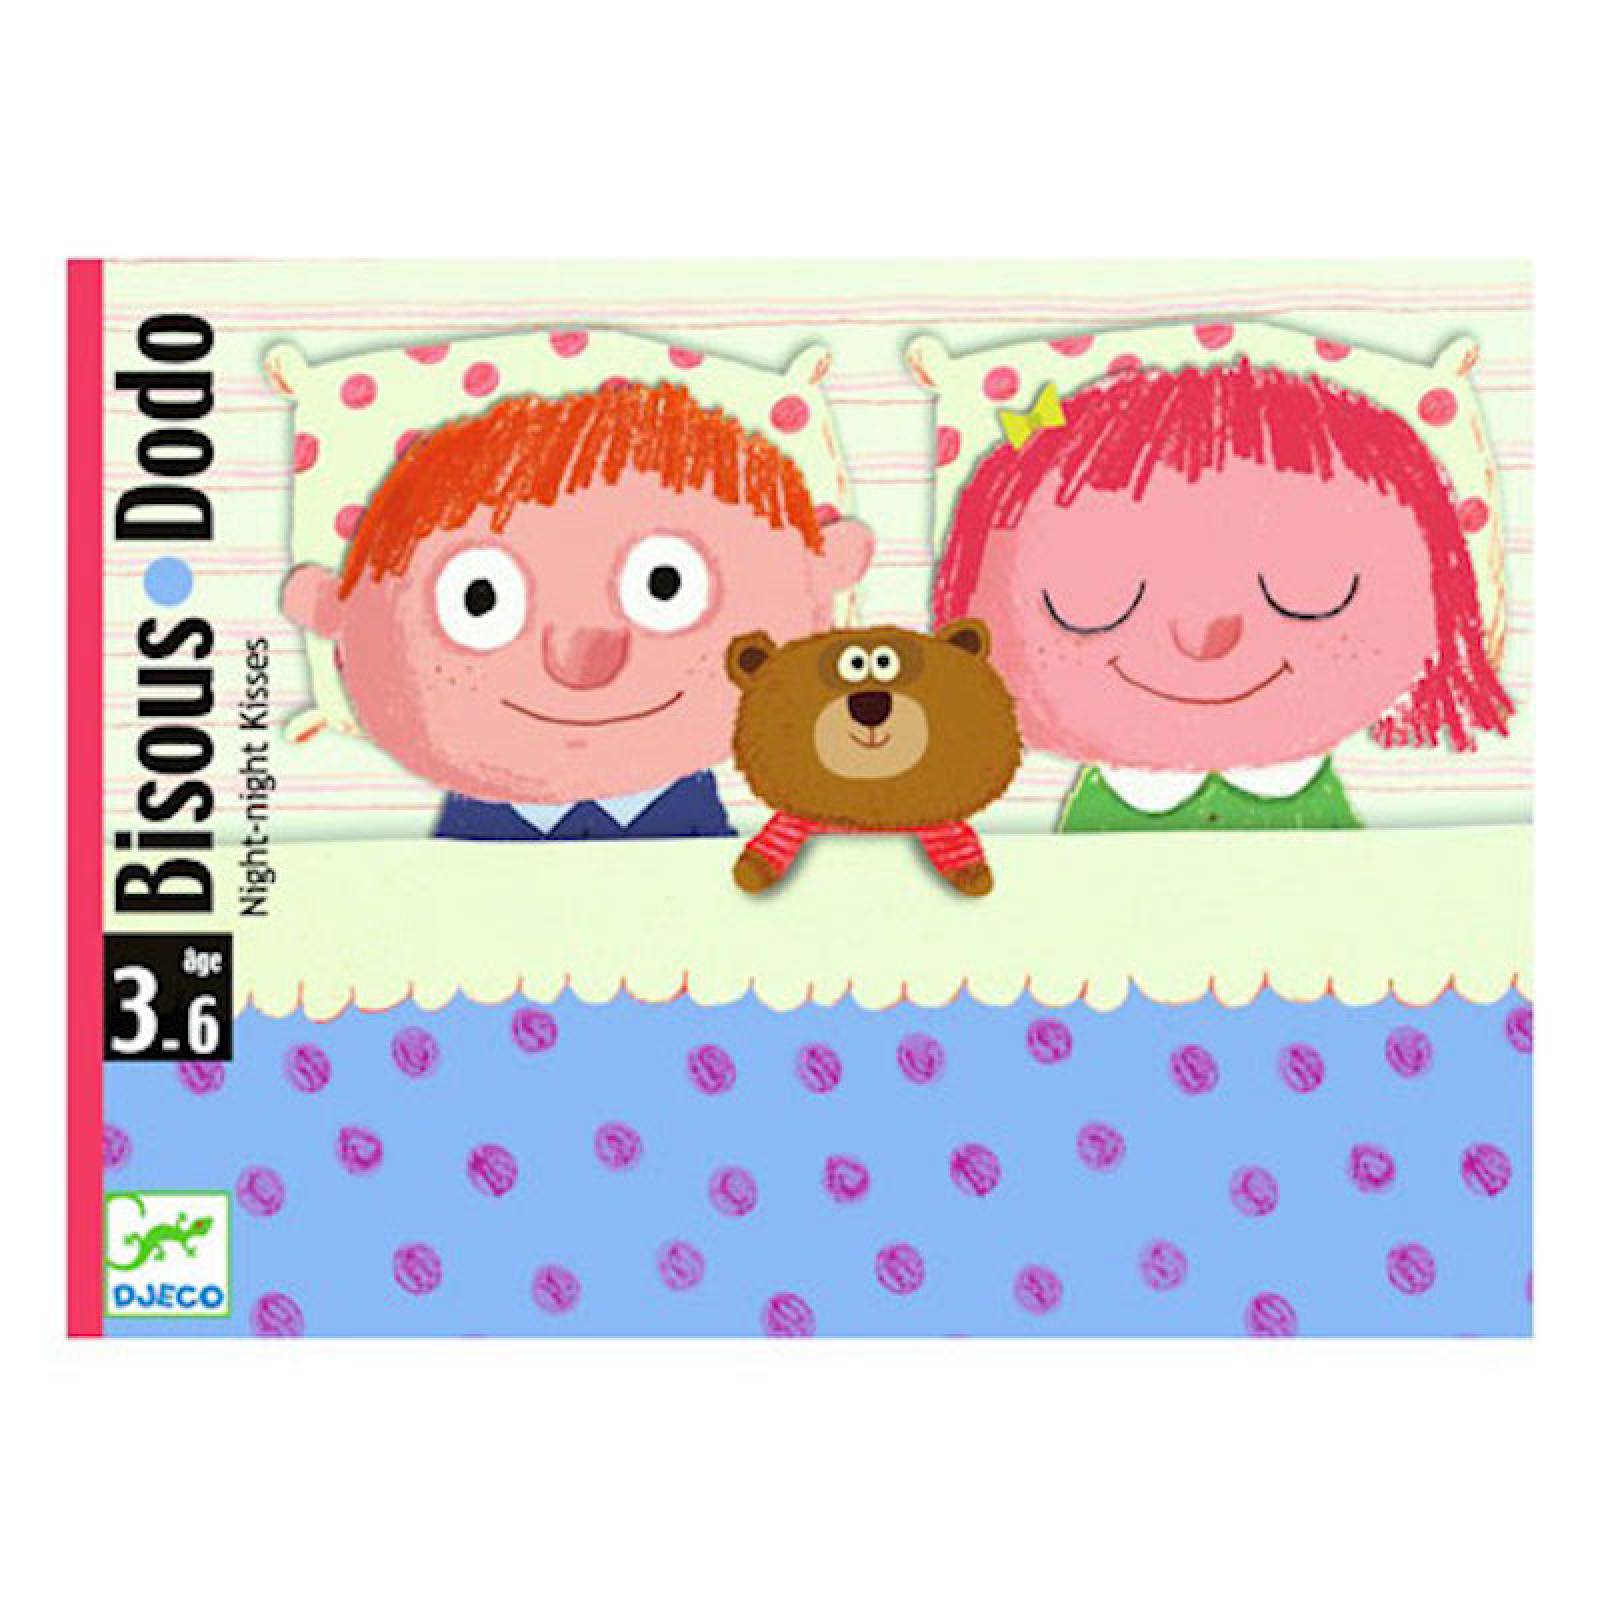 Bisous Dodo Card Game - Bedtime Game for Younger Children 3-6yrs thumbnails